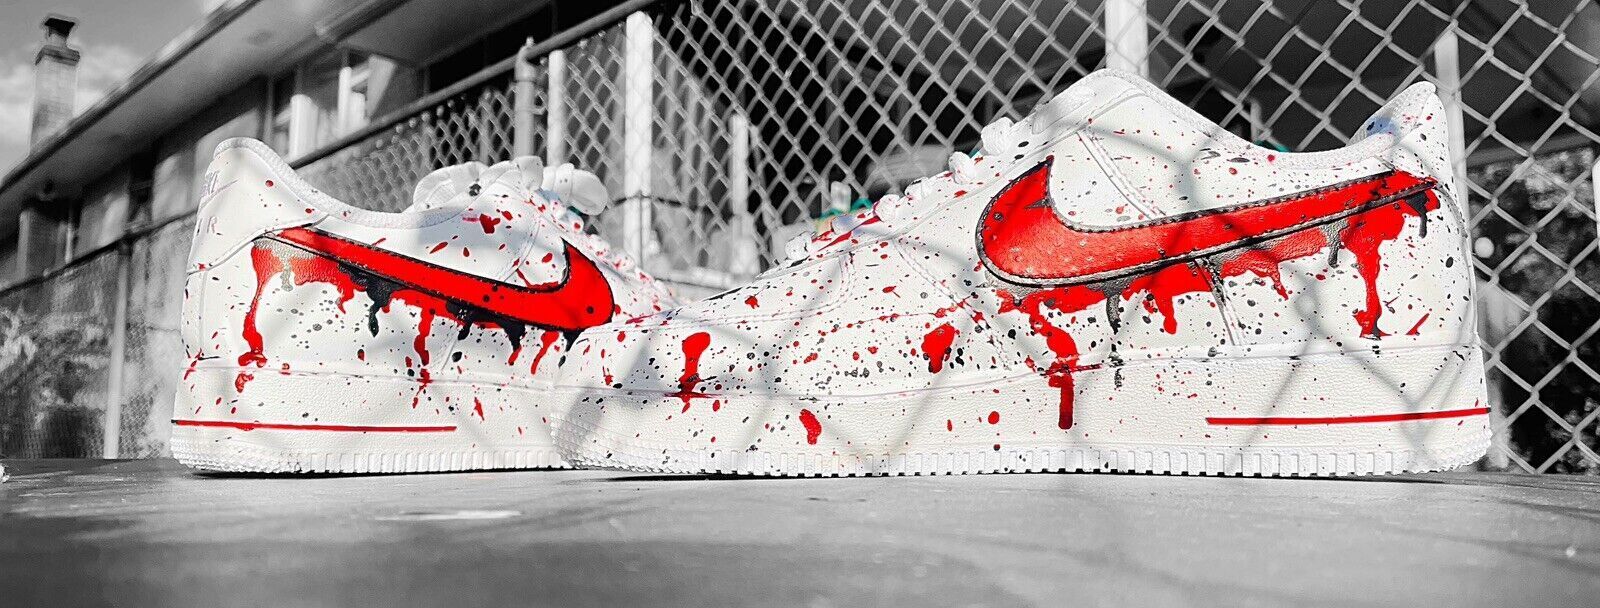 Air Force 1 Custom Sneakers Blood Drip Splatter Red Black White Shoes AF1 Shoes